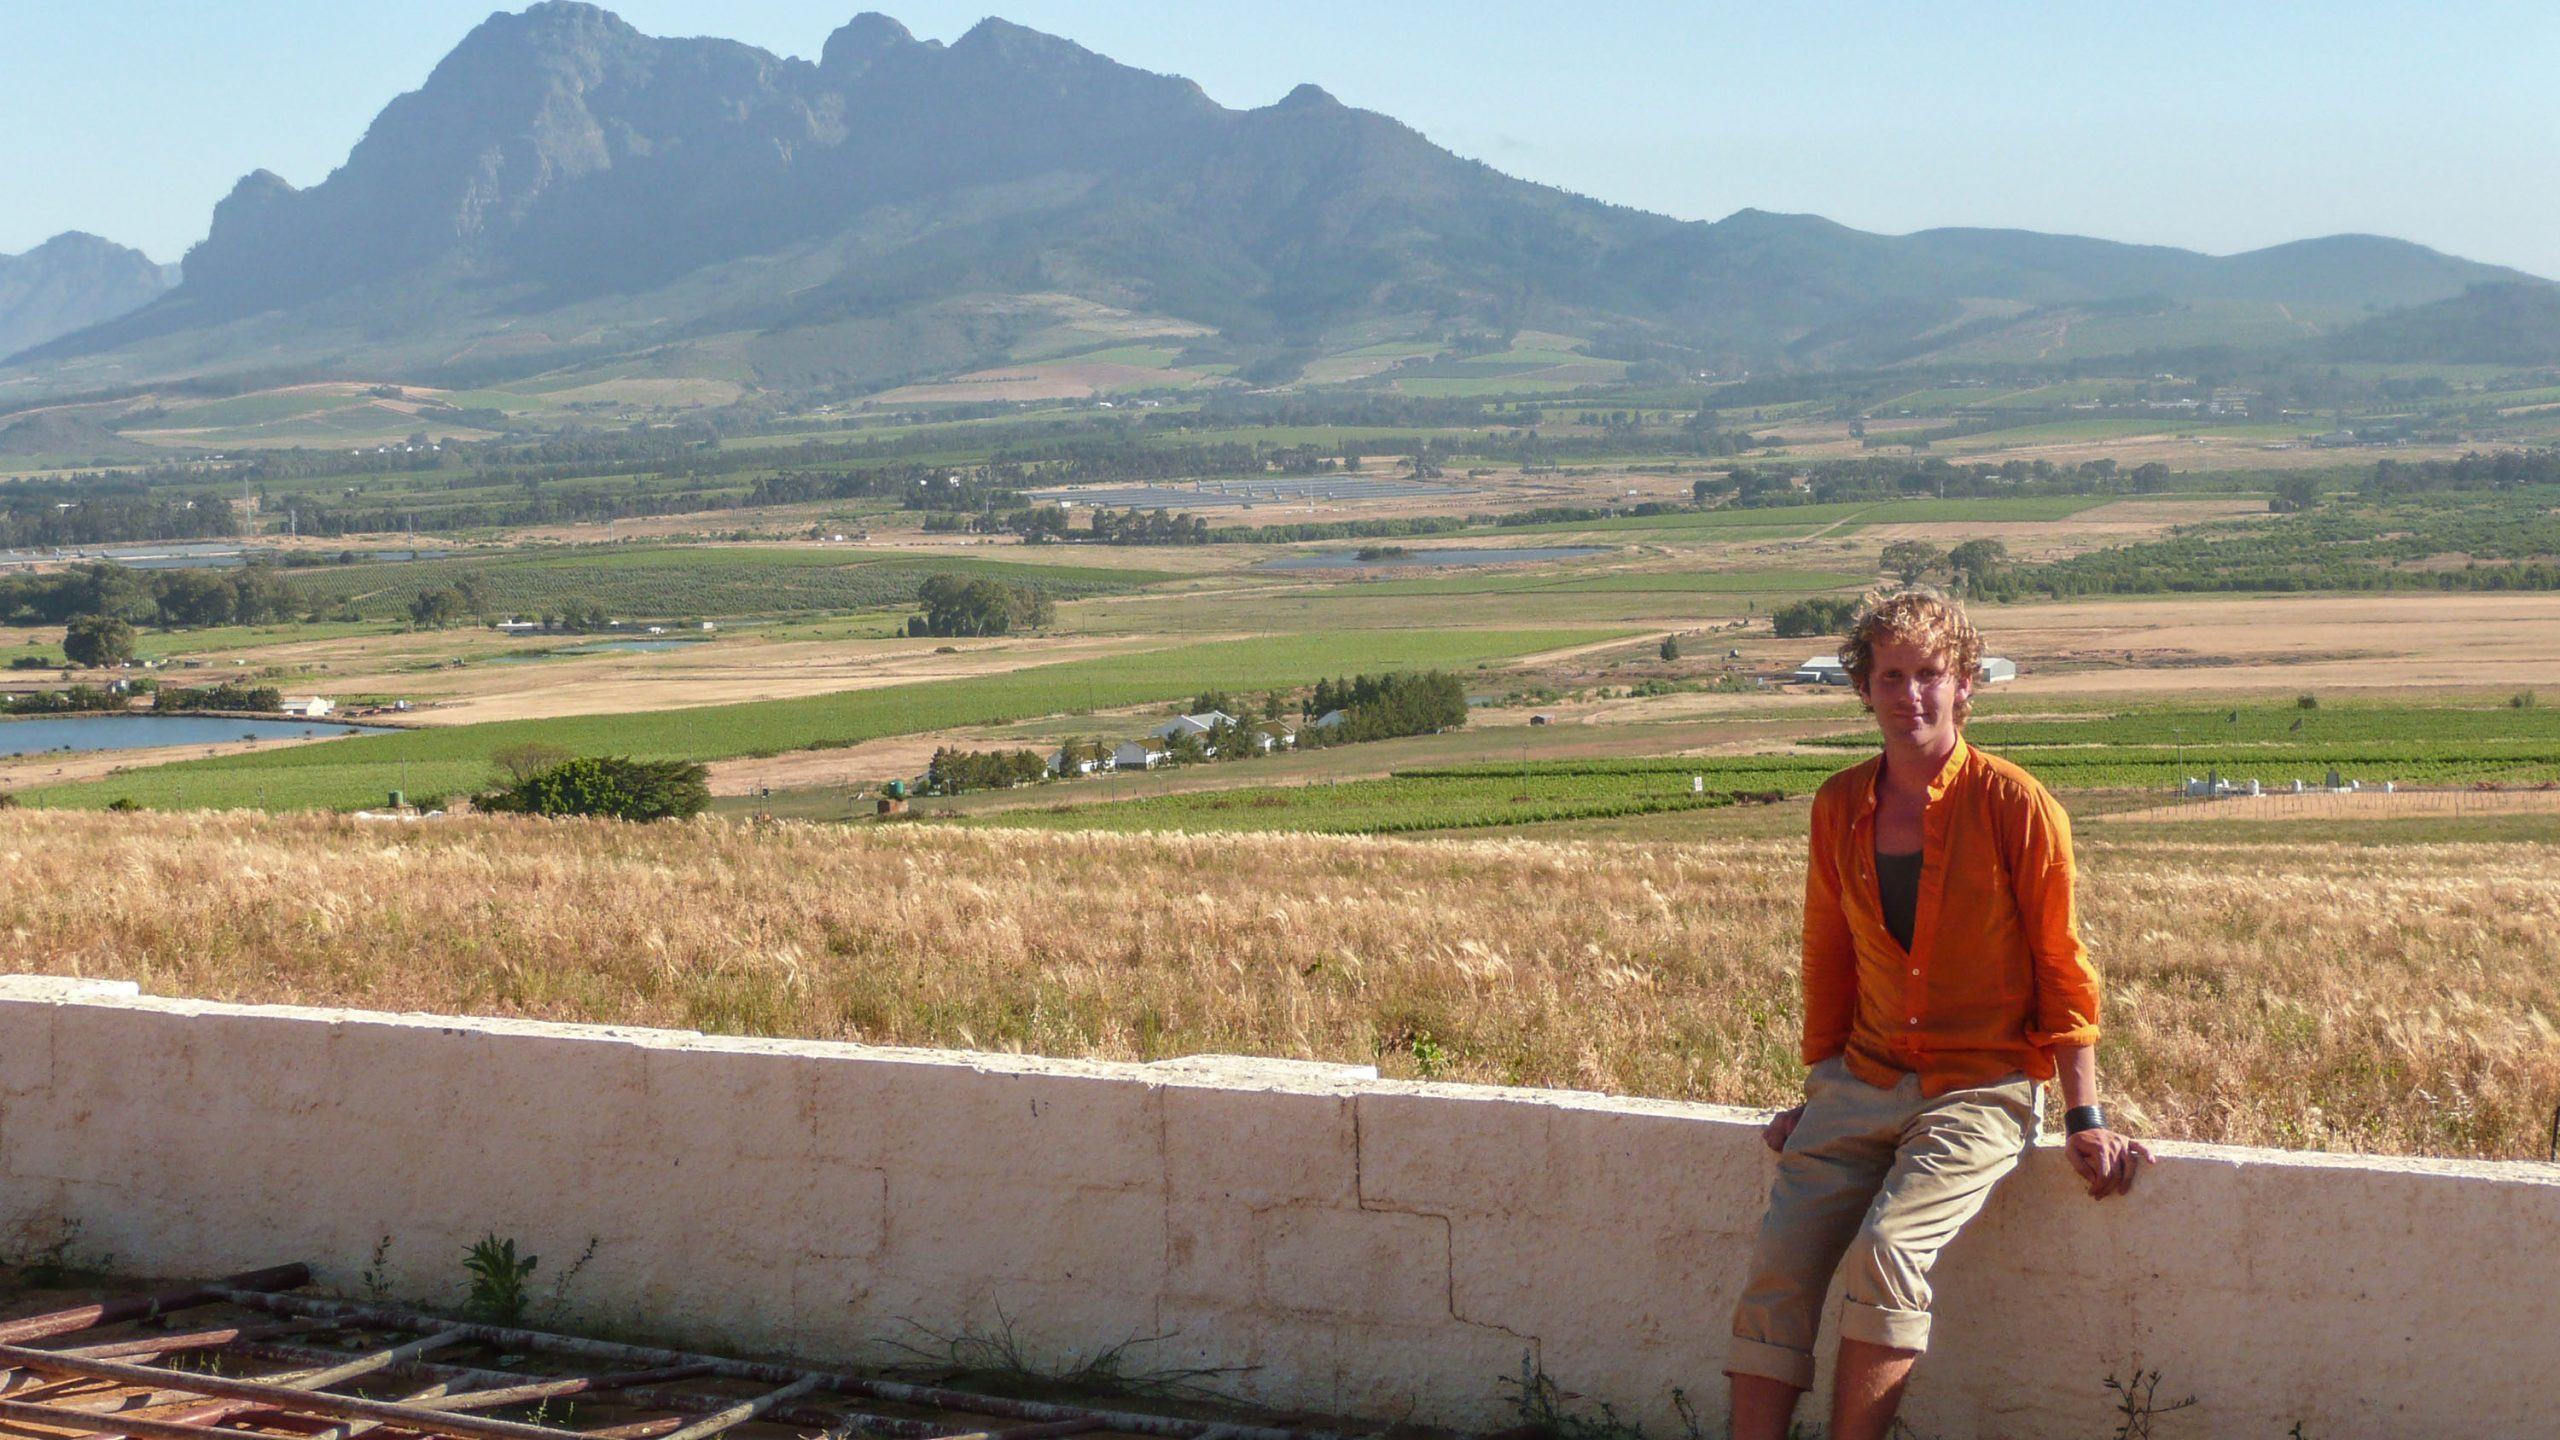 Ben visiting winery of The Cape Winelands South Africa